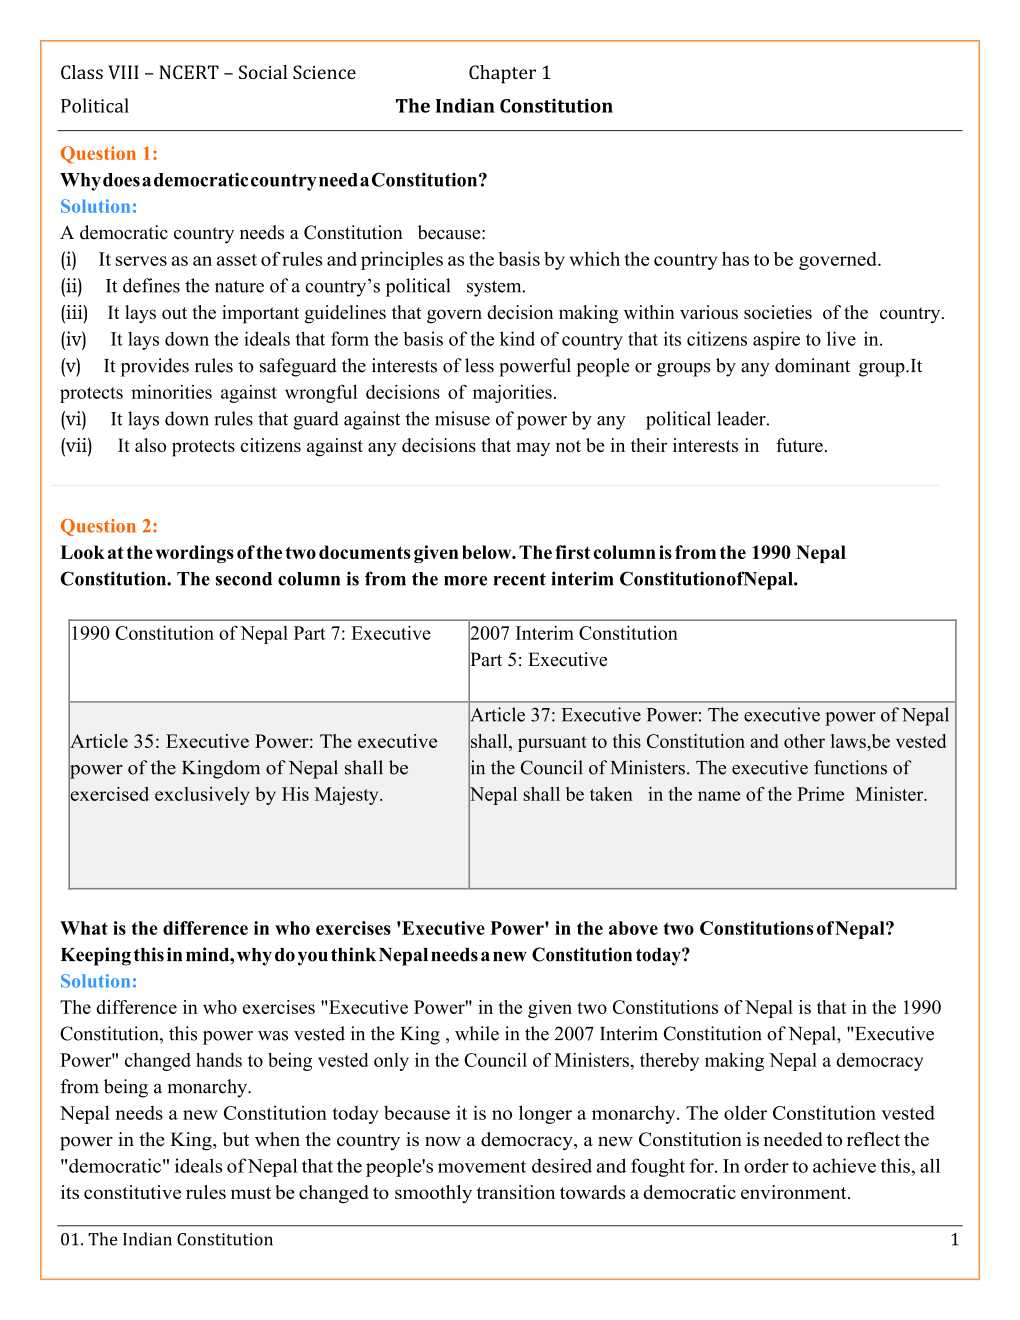 NCERT Solutions For Class 8 Social Science Social and Political Life Chapter 1 